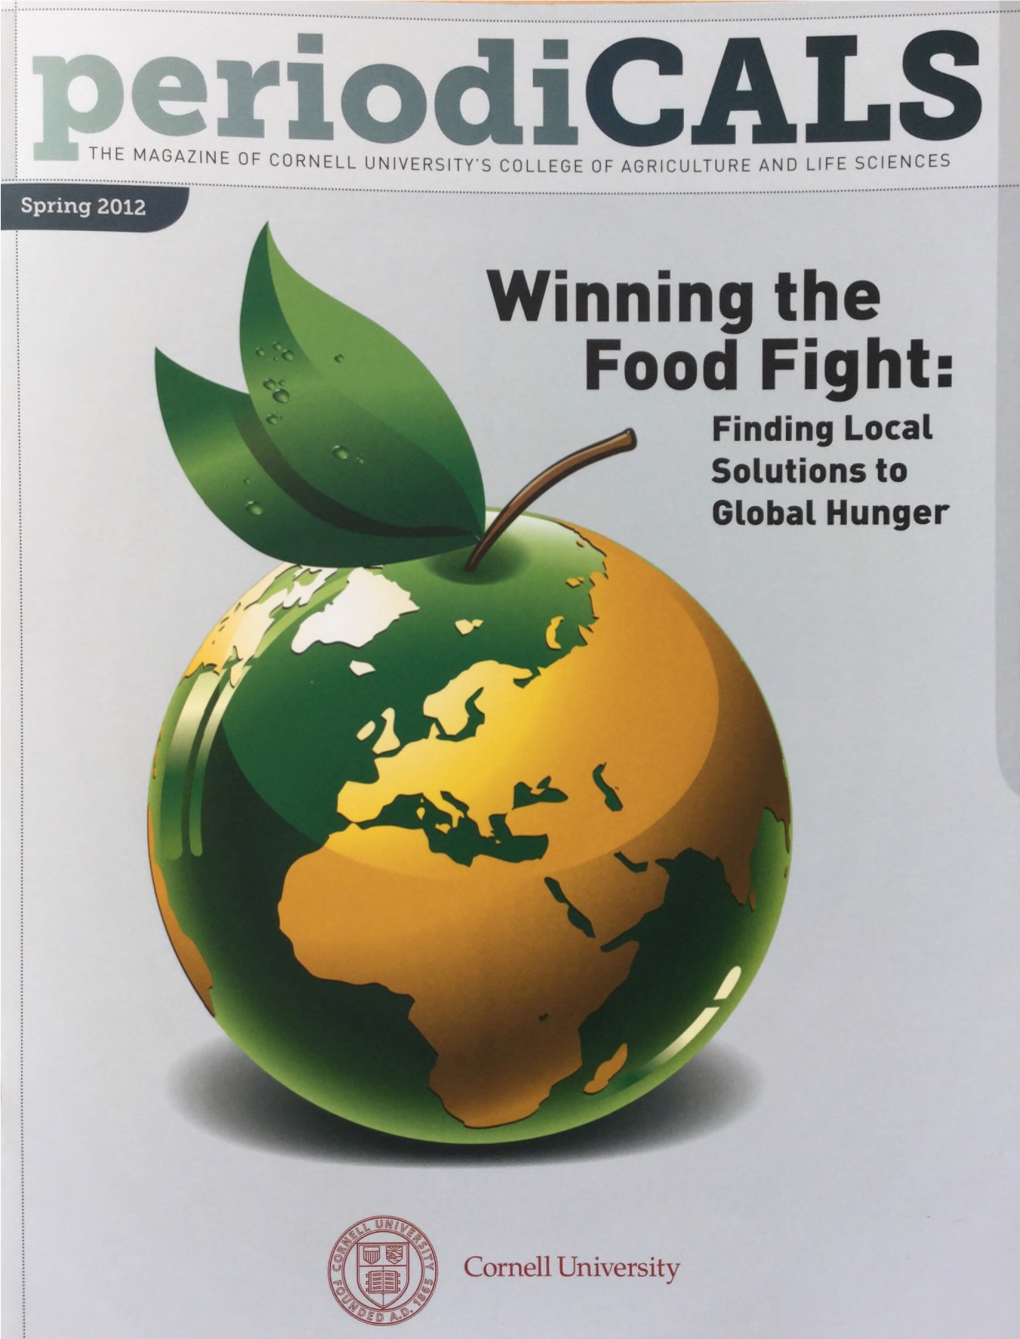 Winning the Food Fight: Finding Local Solutions to Global Hunger